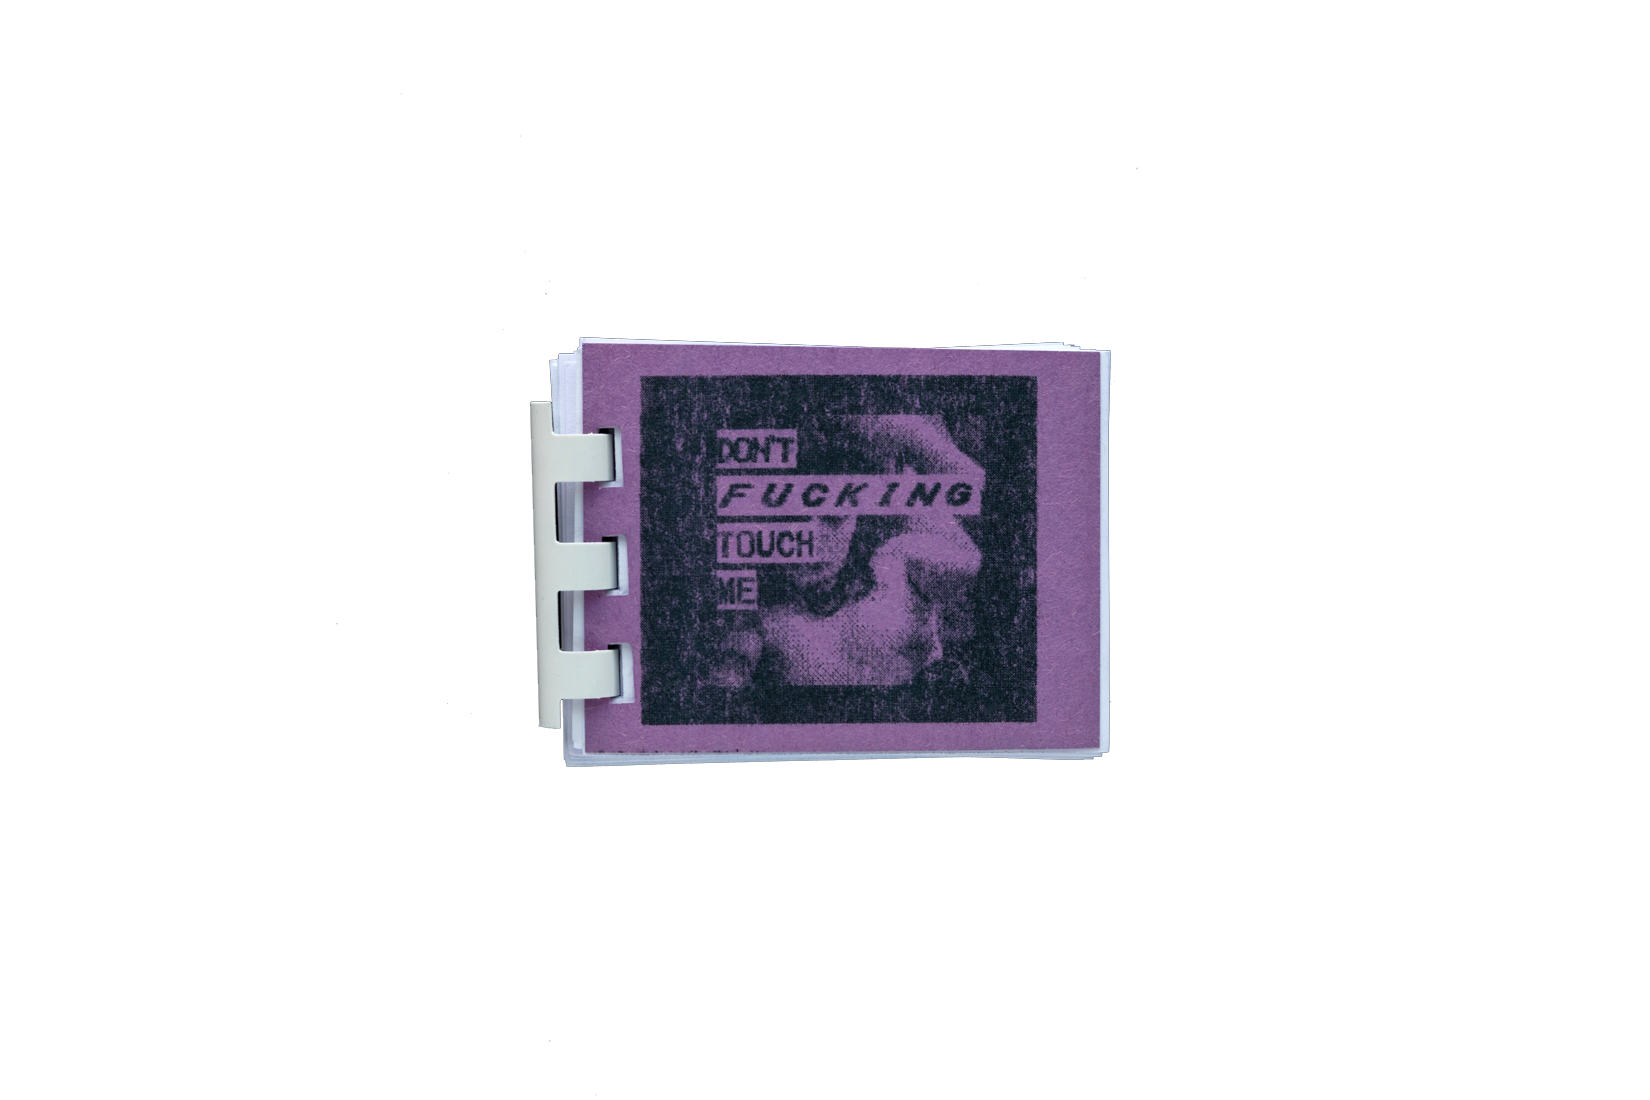 Don't Fucking Touch Me (GameBoy zine collection) by Carta Monir